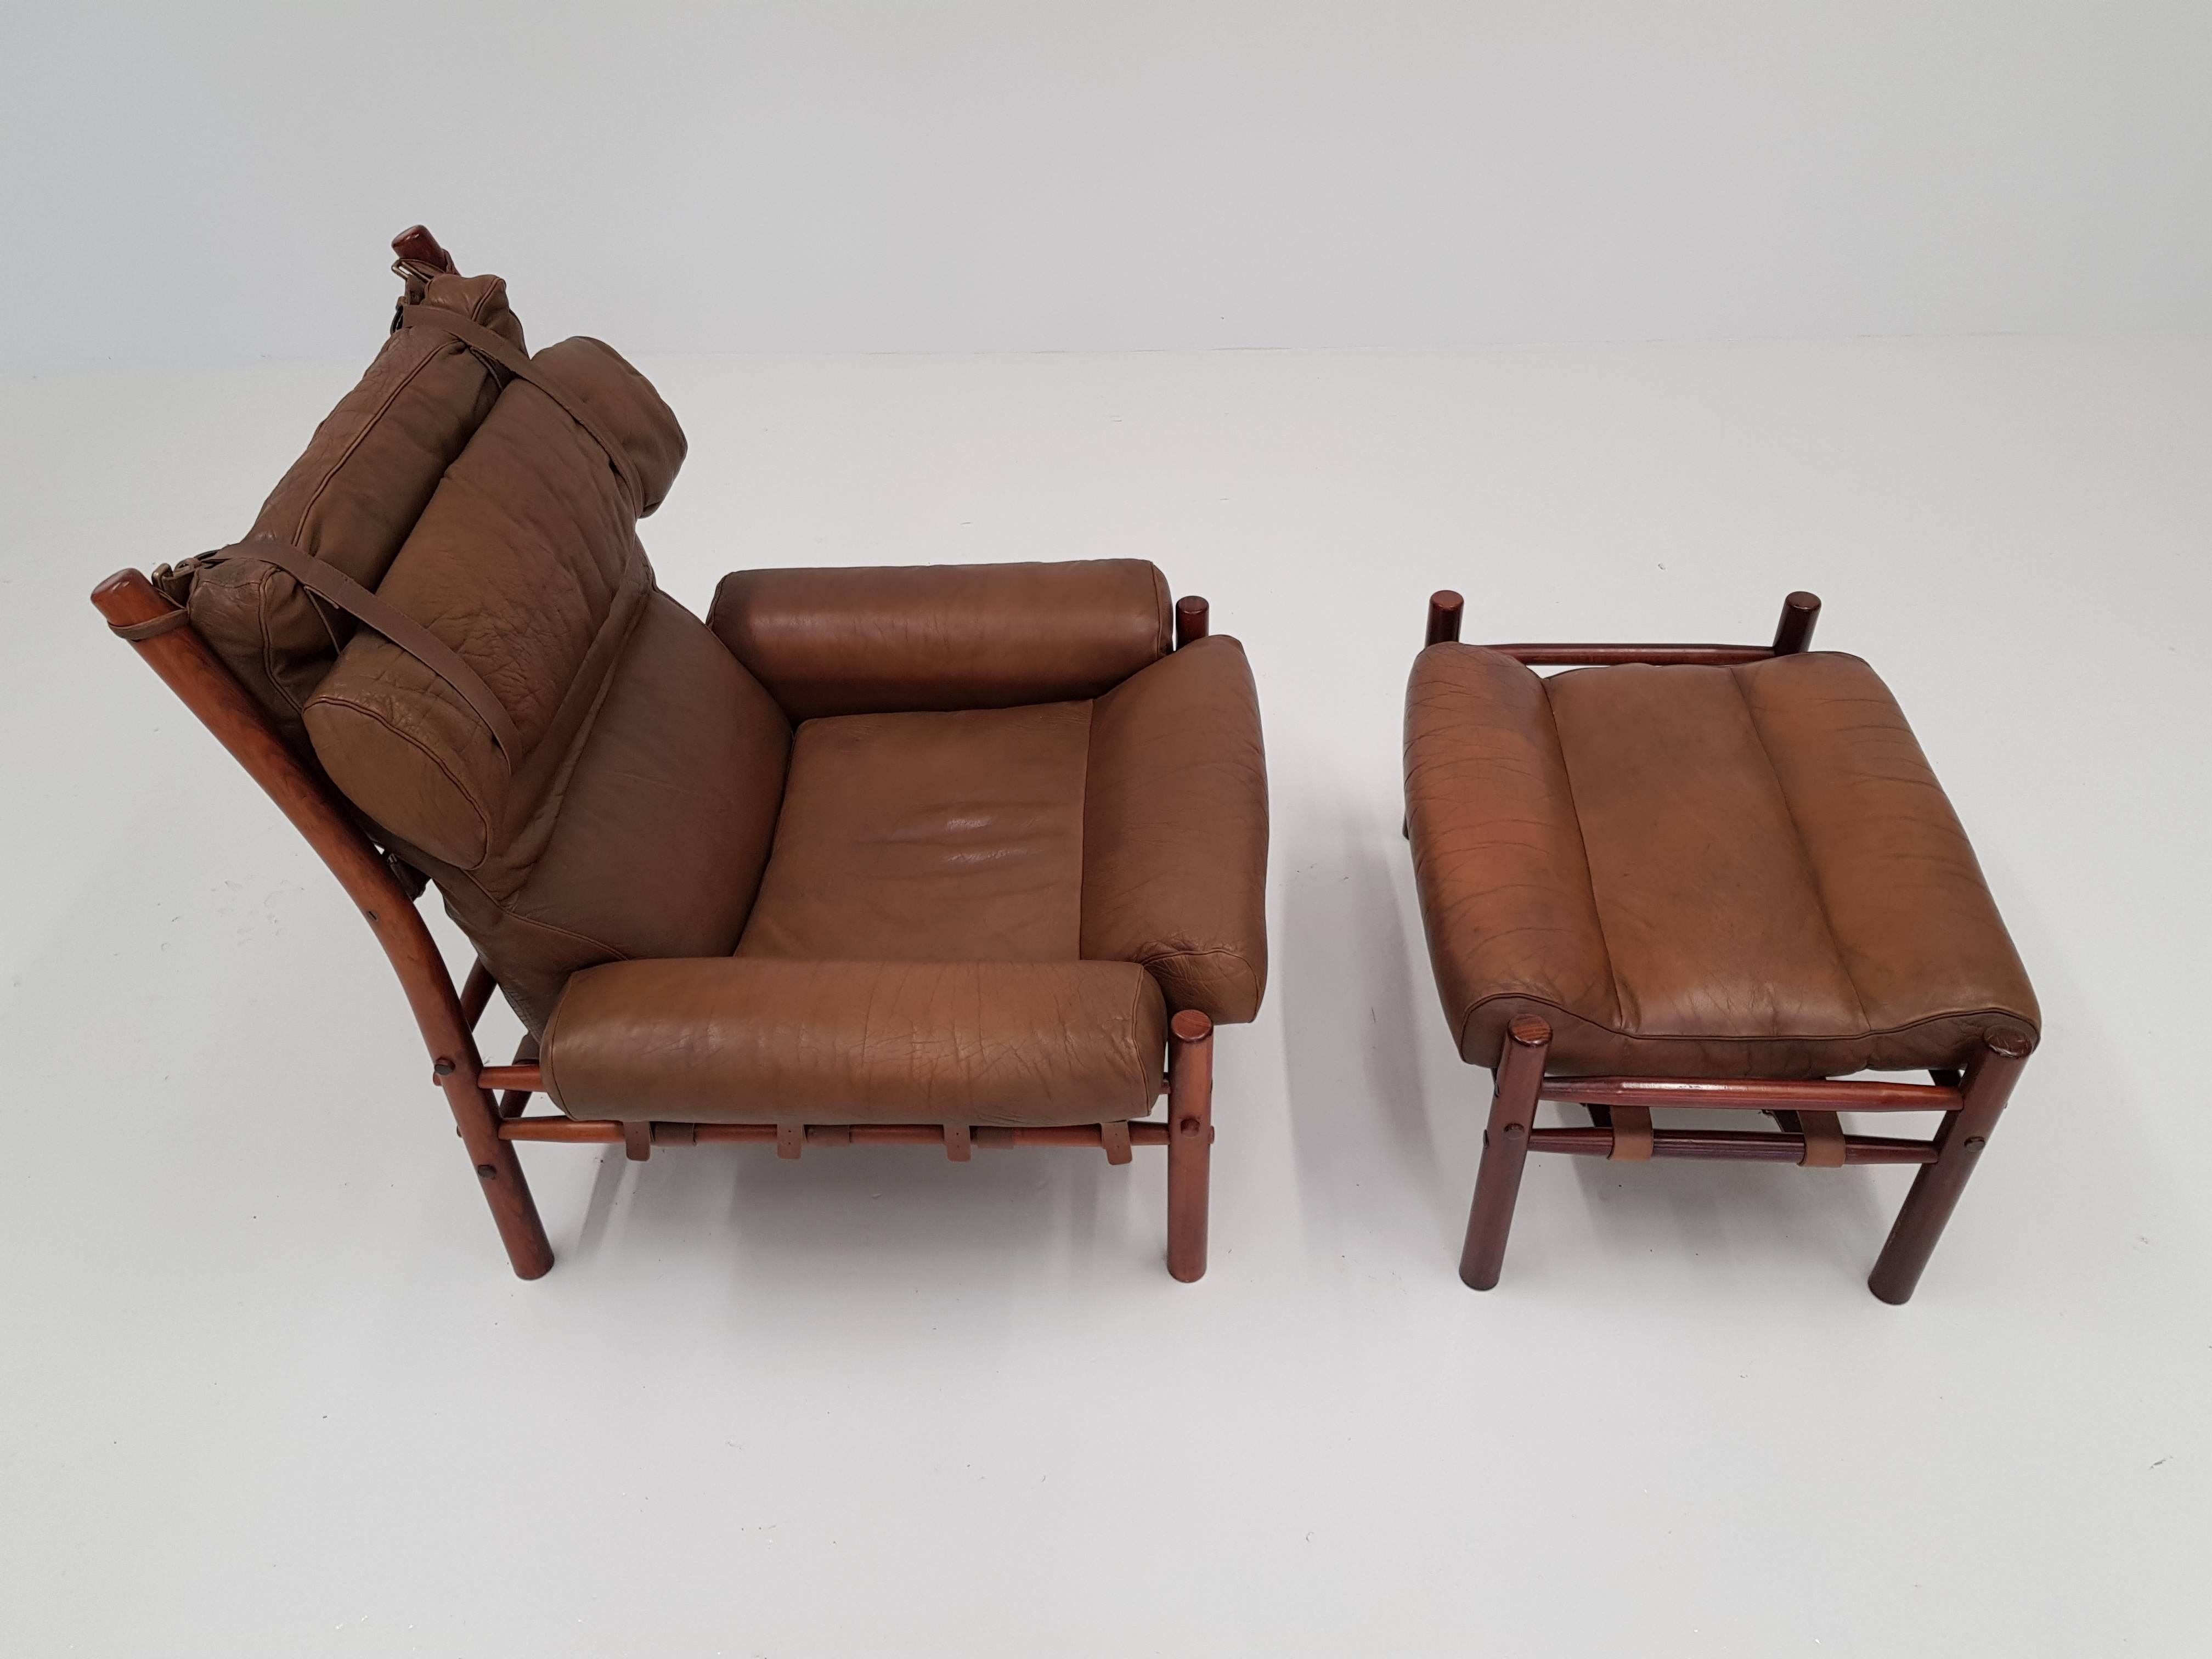 20th Century Inca Chair and Footstool by Swedish Designer Arne Norell for Norell Möbler